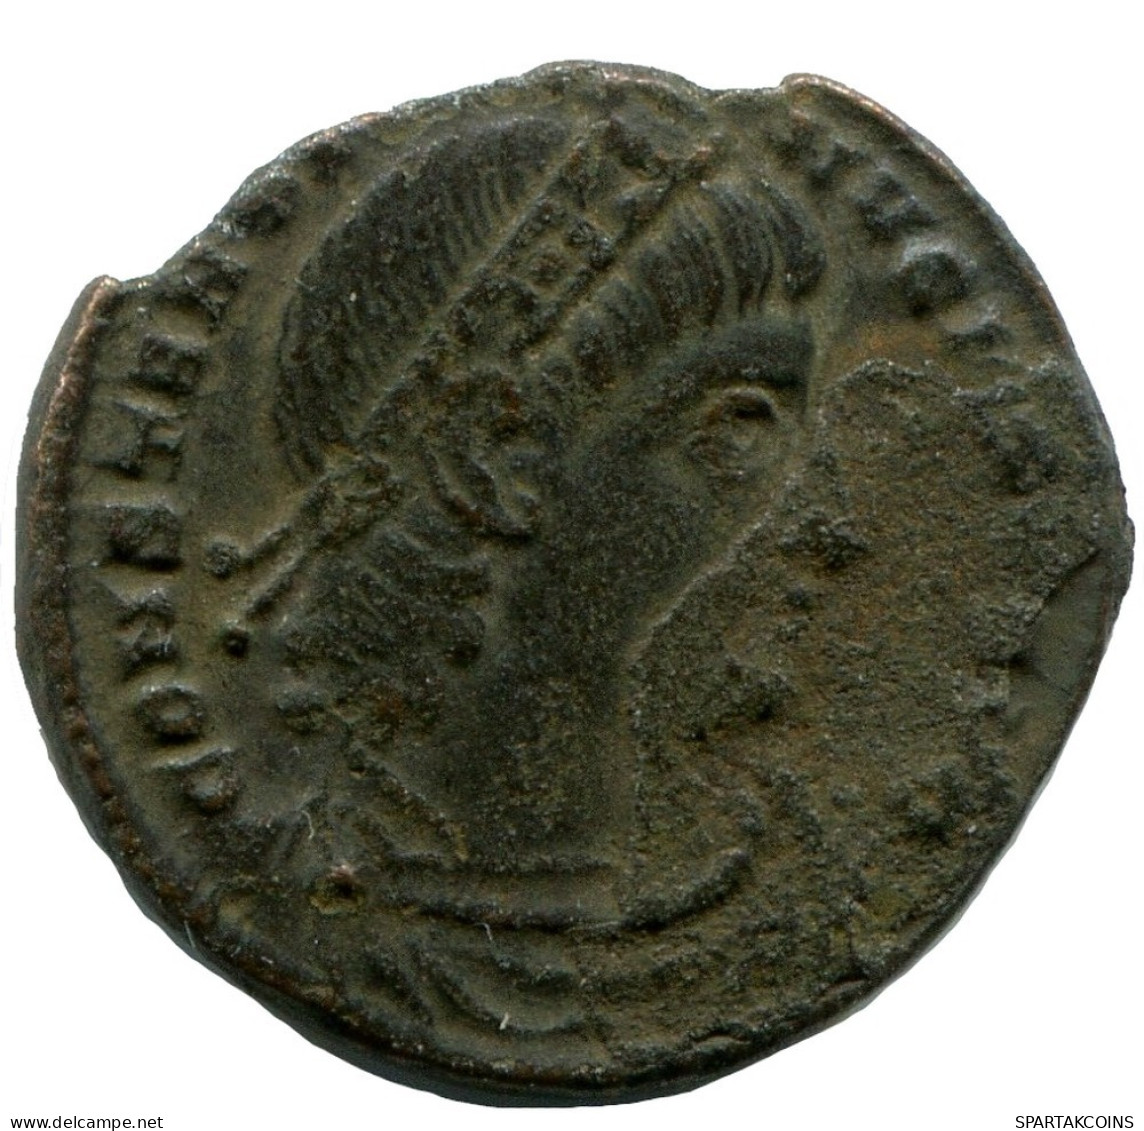 CONSTANTINE I MINTED IN CONSTANTINOPLE FOUND IN IHNASYAH HOARD #ANC10781.14.E.A - The Christian Empire (307 AD To 363 AD)